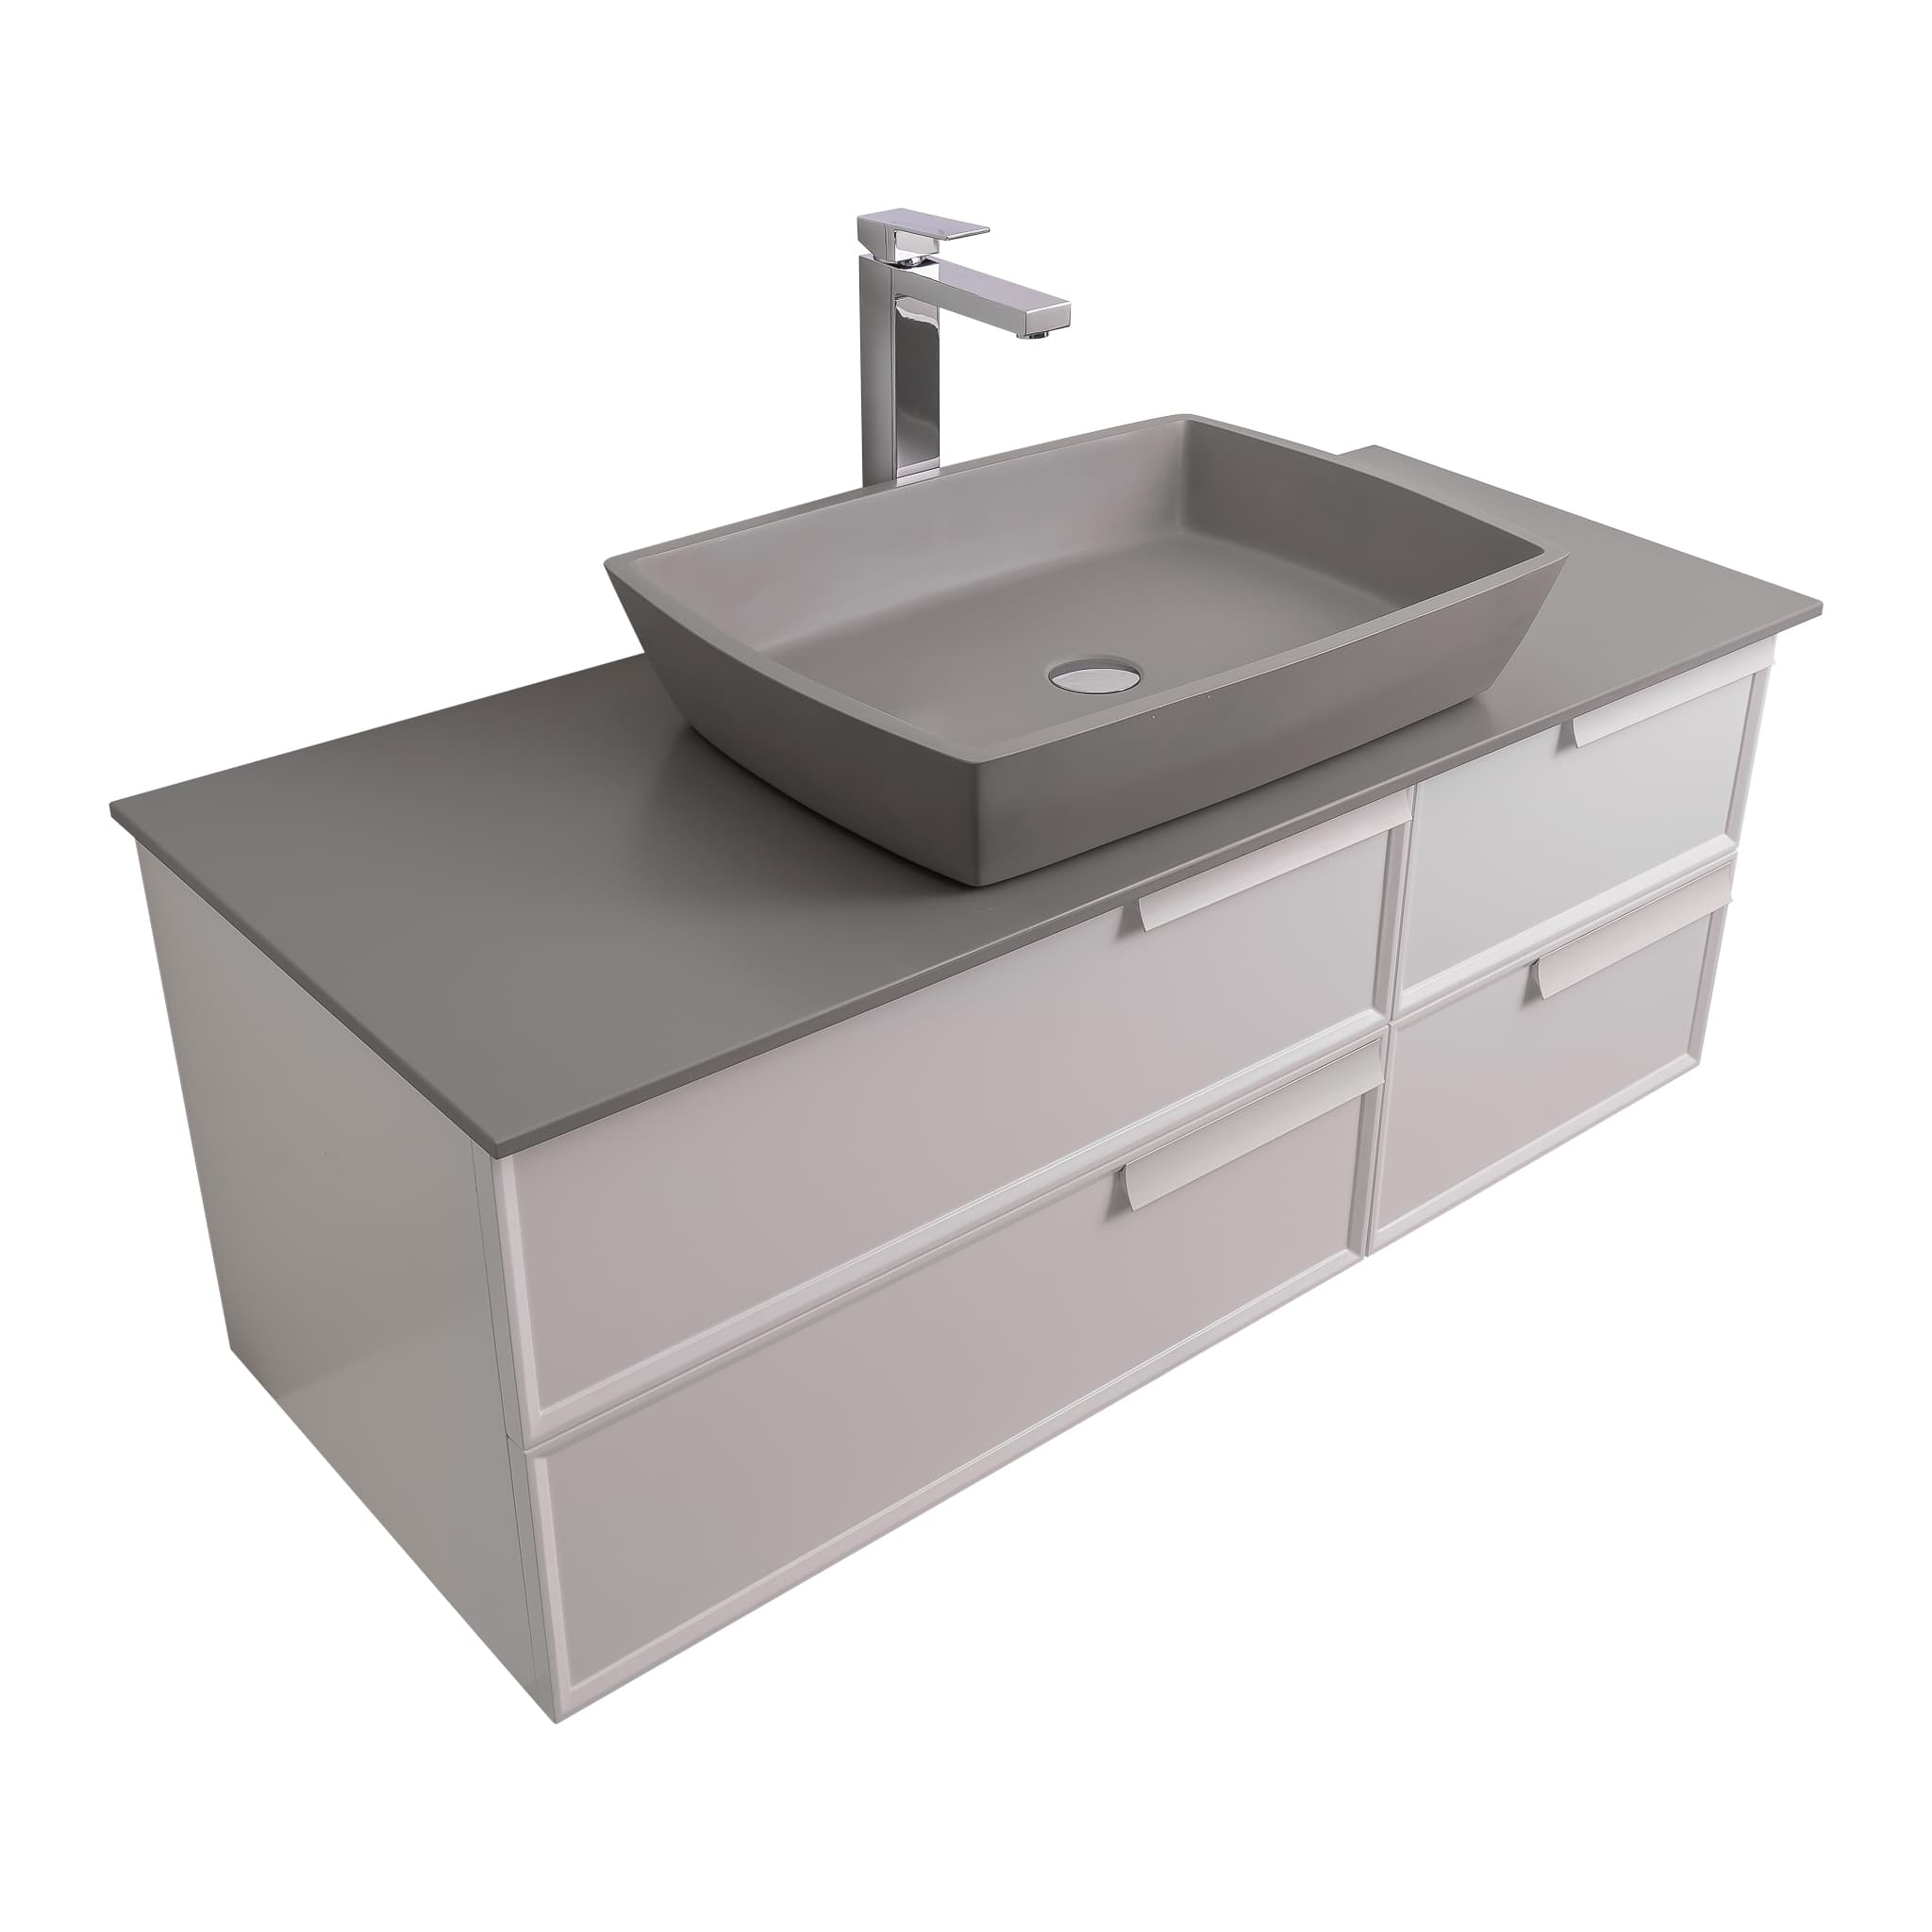 Garda 47.5 Matte White Cabinet, Solid Surface Flat Grey Counter and Square Solid Surface Grey Basin 1316, Wall Mounted Modern Vanity Set